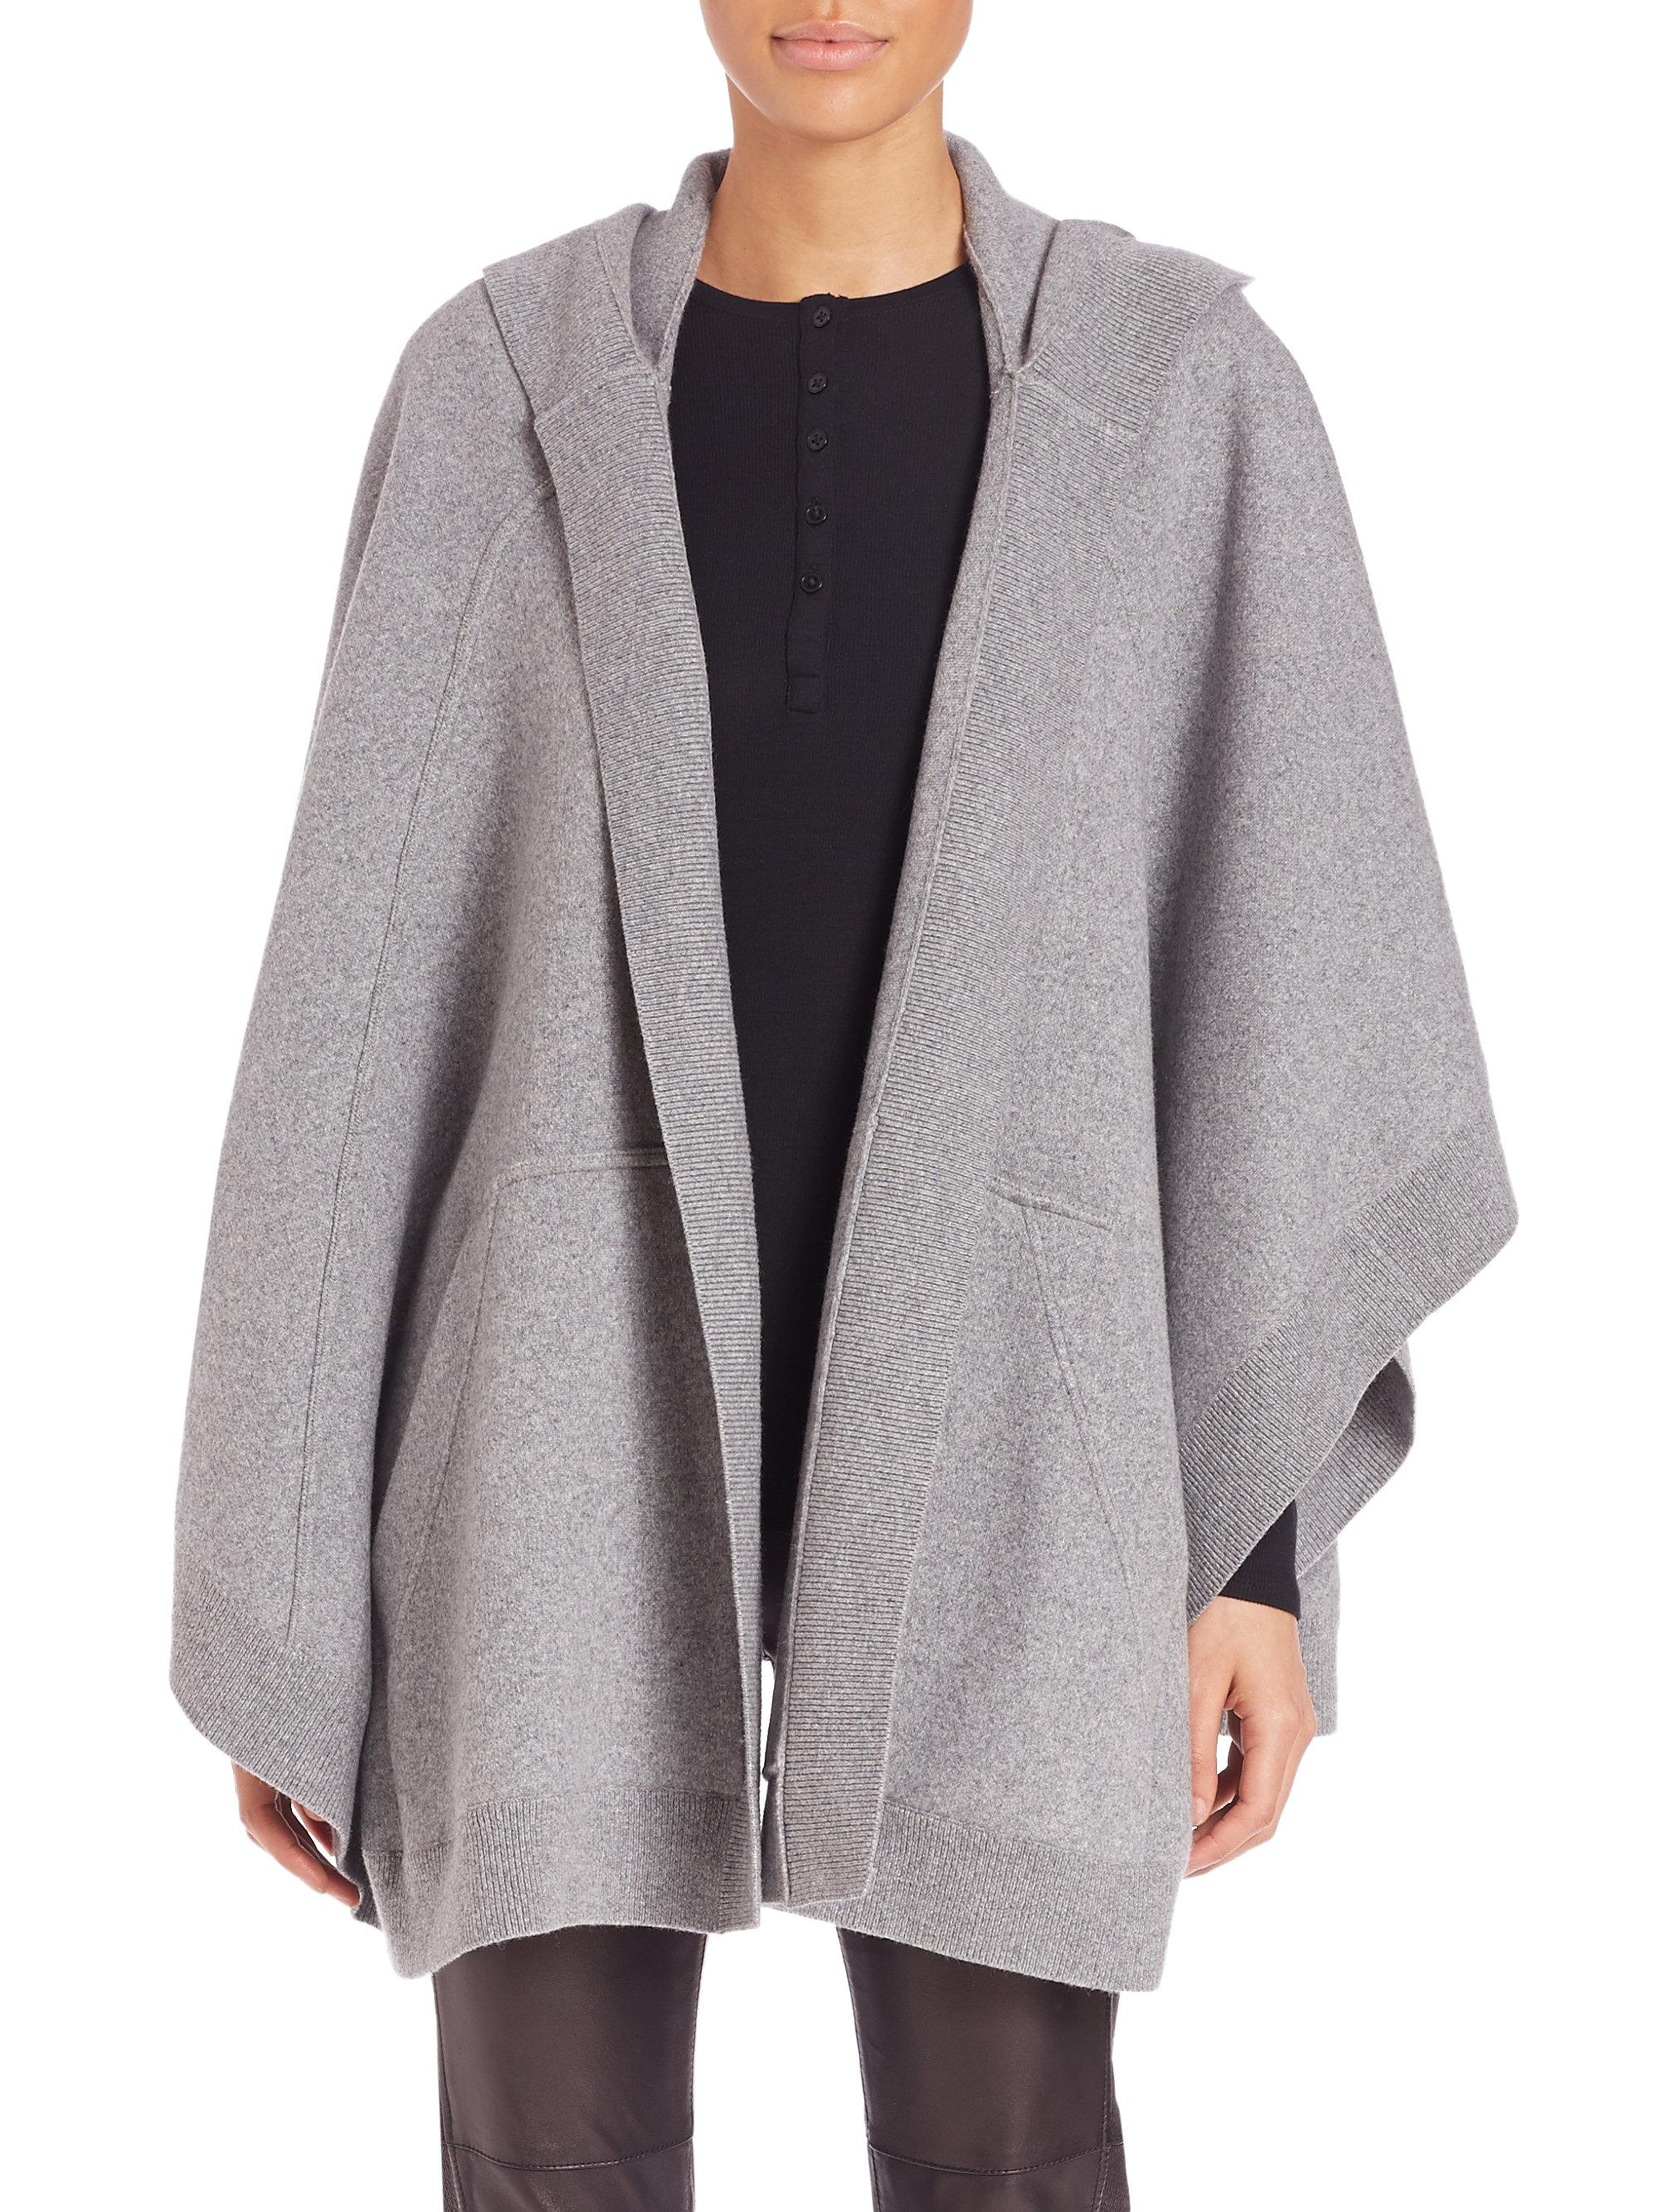 Burberry Wool & Cashmere-blended Hooded Poncho in Grey (Gray) - Lyst